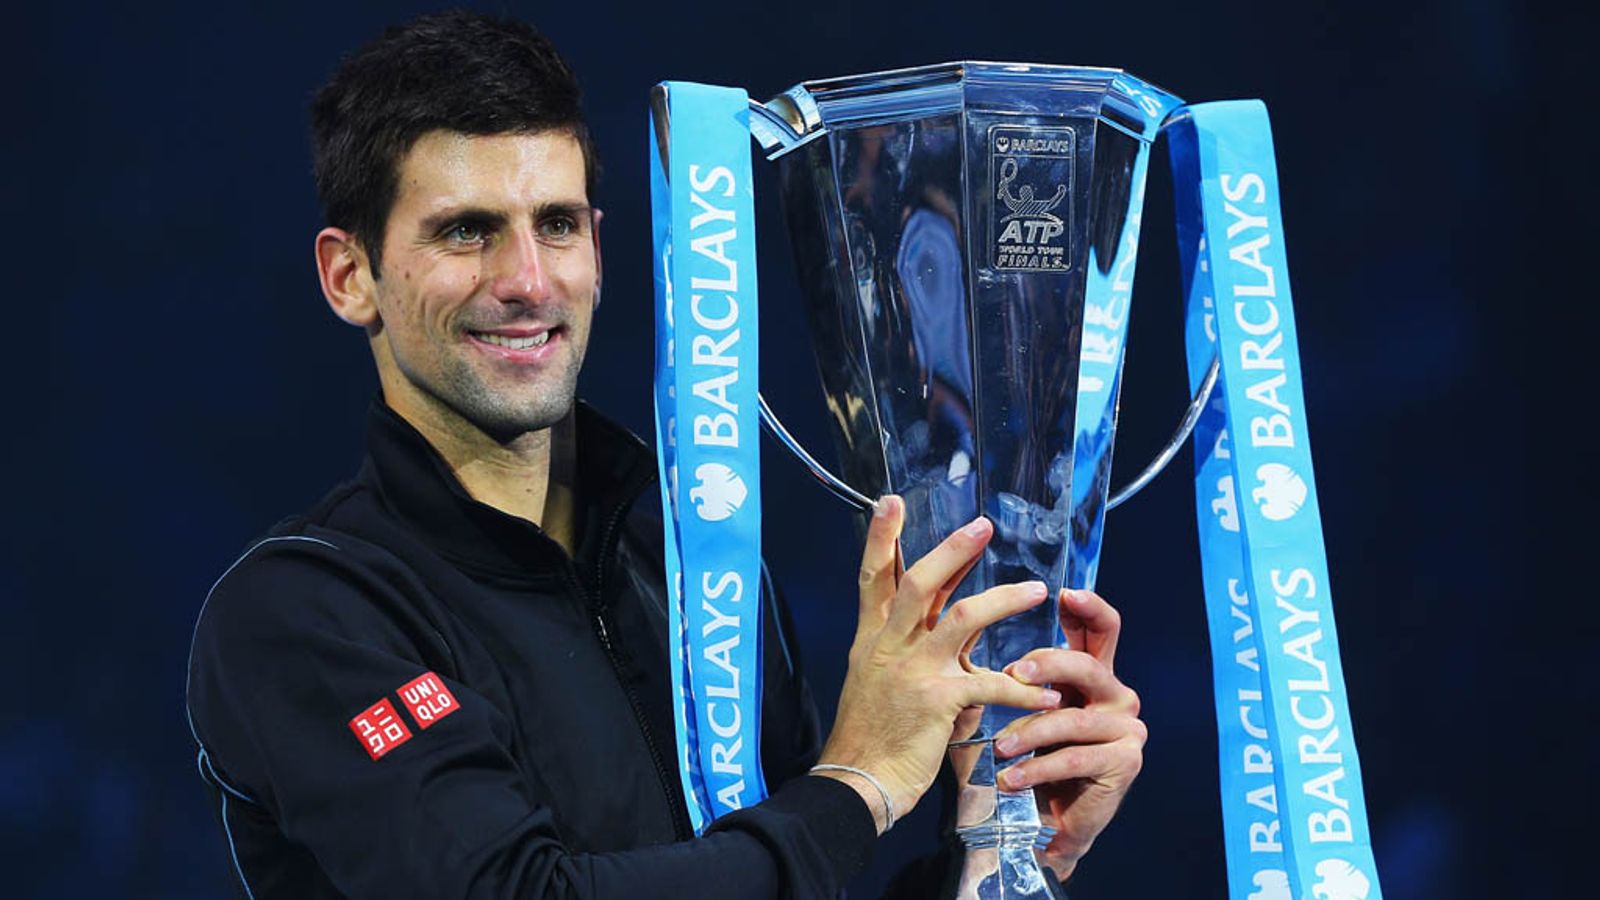 ATP World Tour Finals Eightman lineup for event at the O2 in London